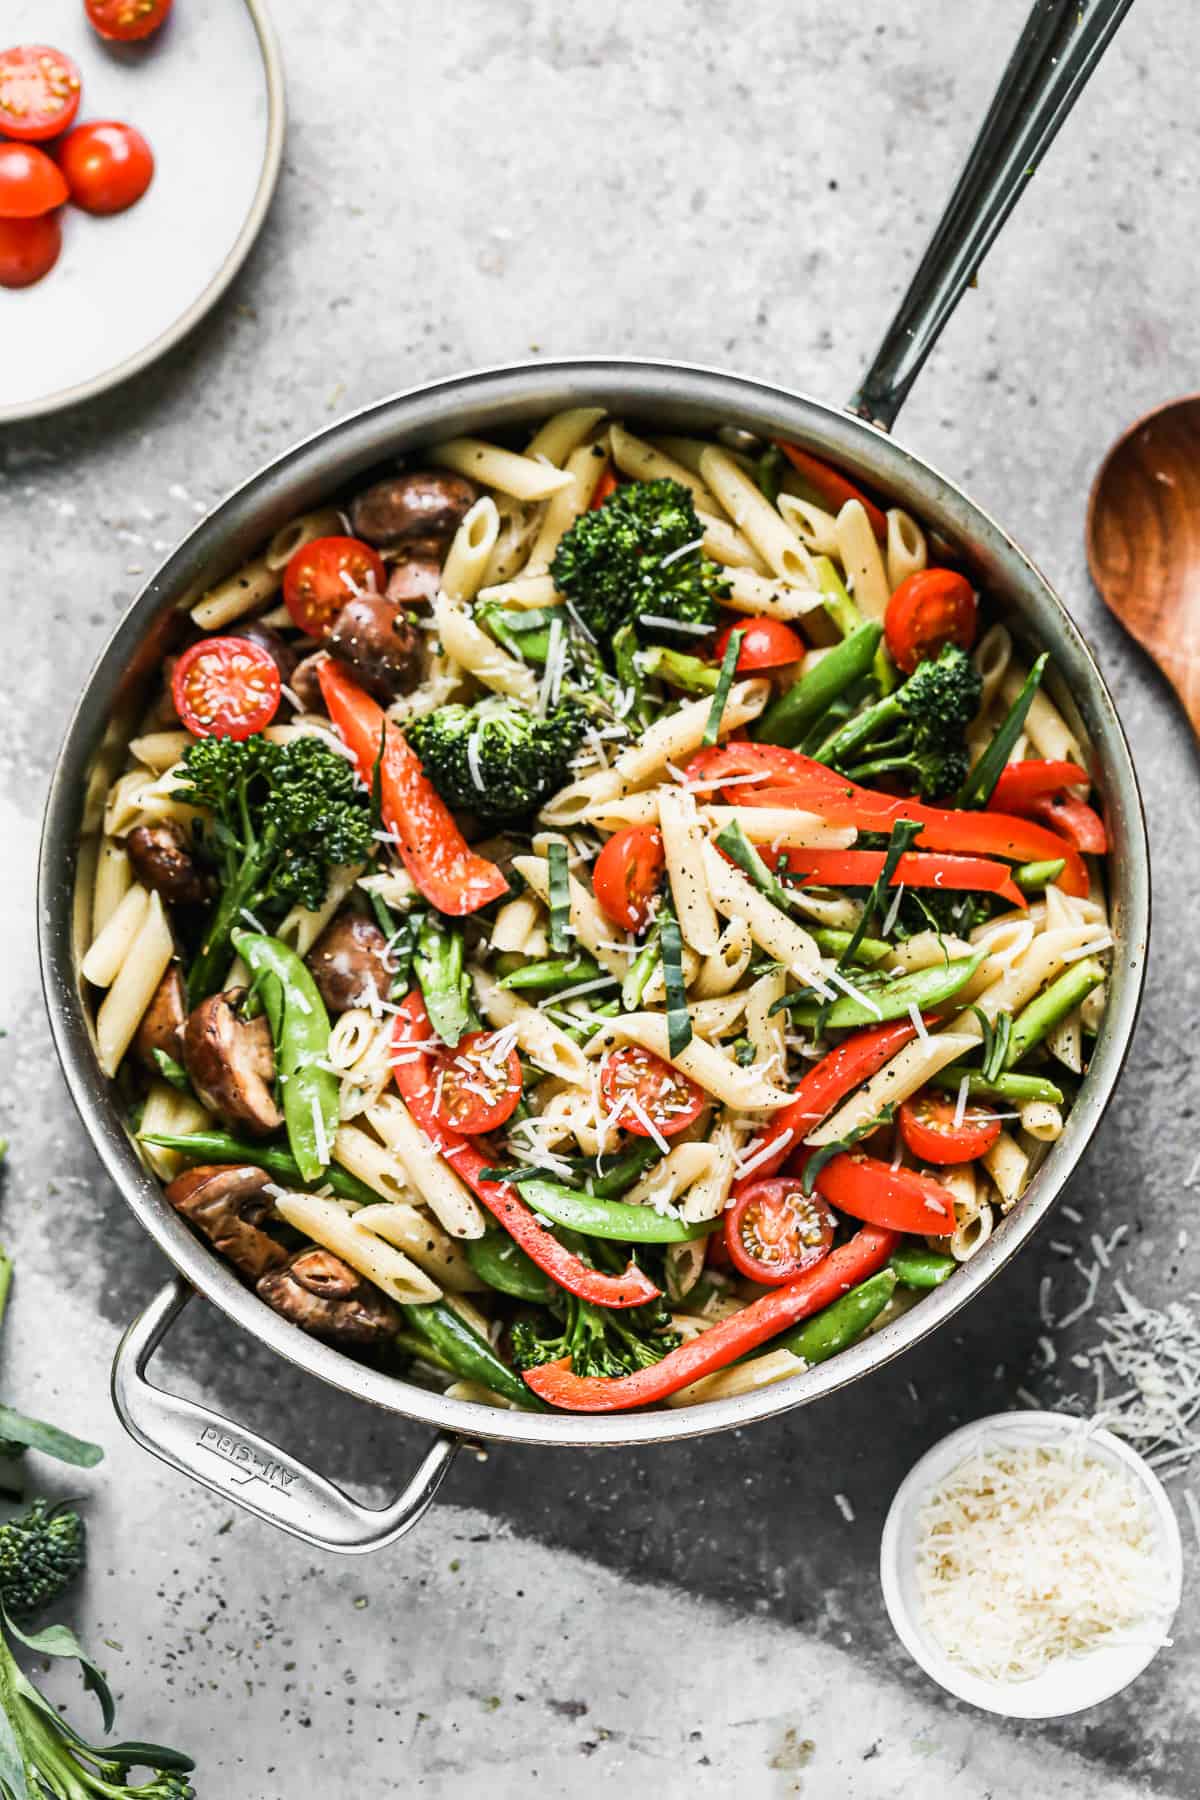 A creamy pasta primavera recipe in a large stainless steel pan, garnished with fresh basil, ready to serve.